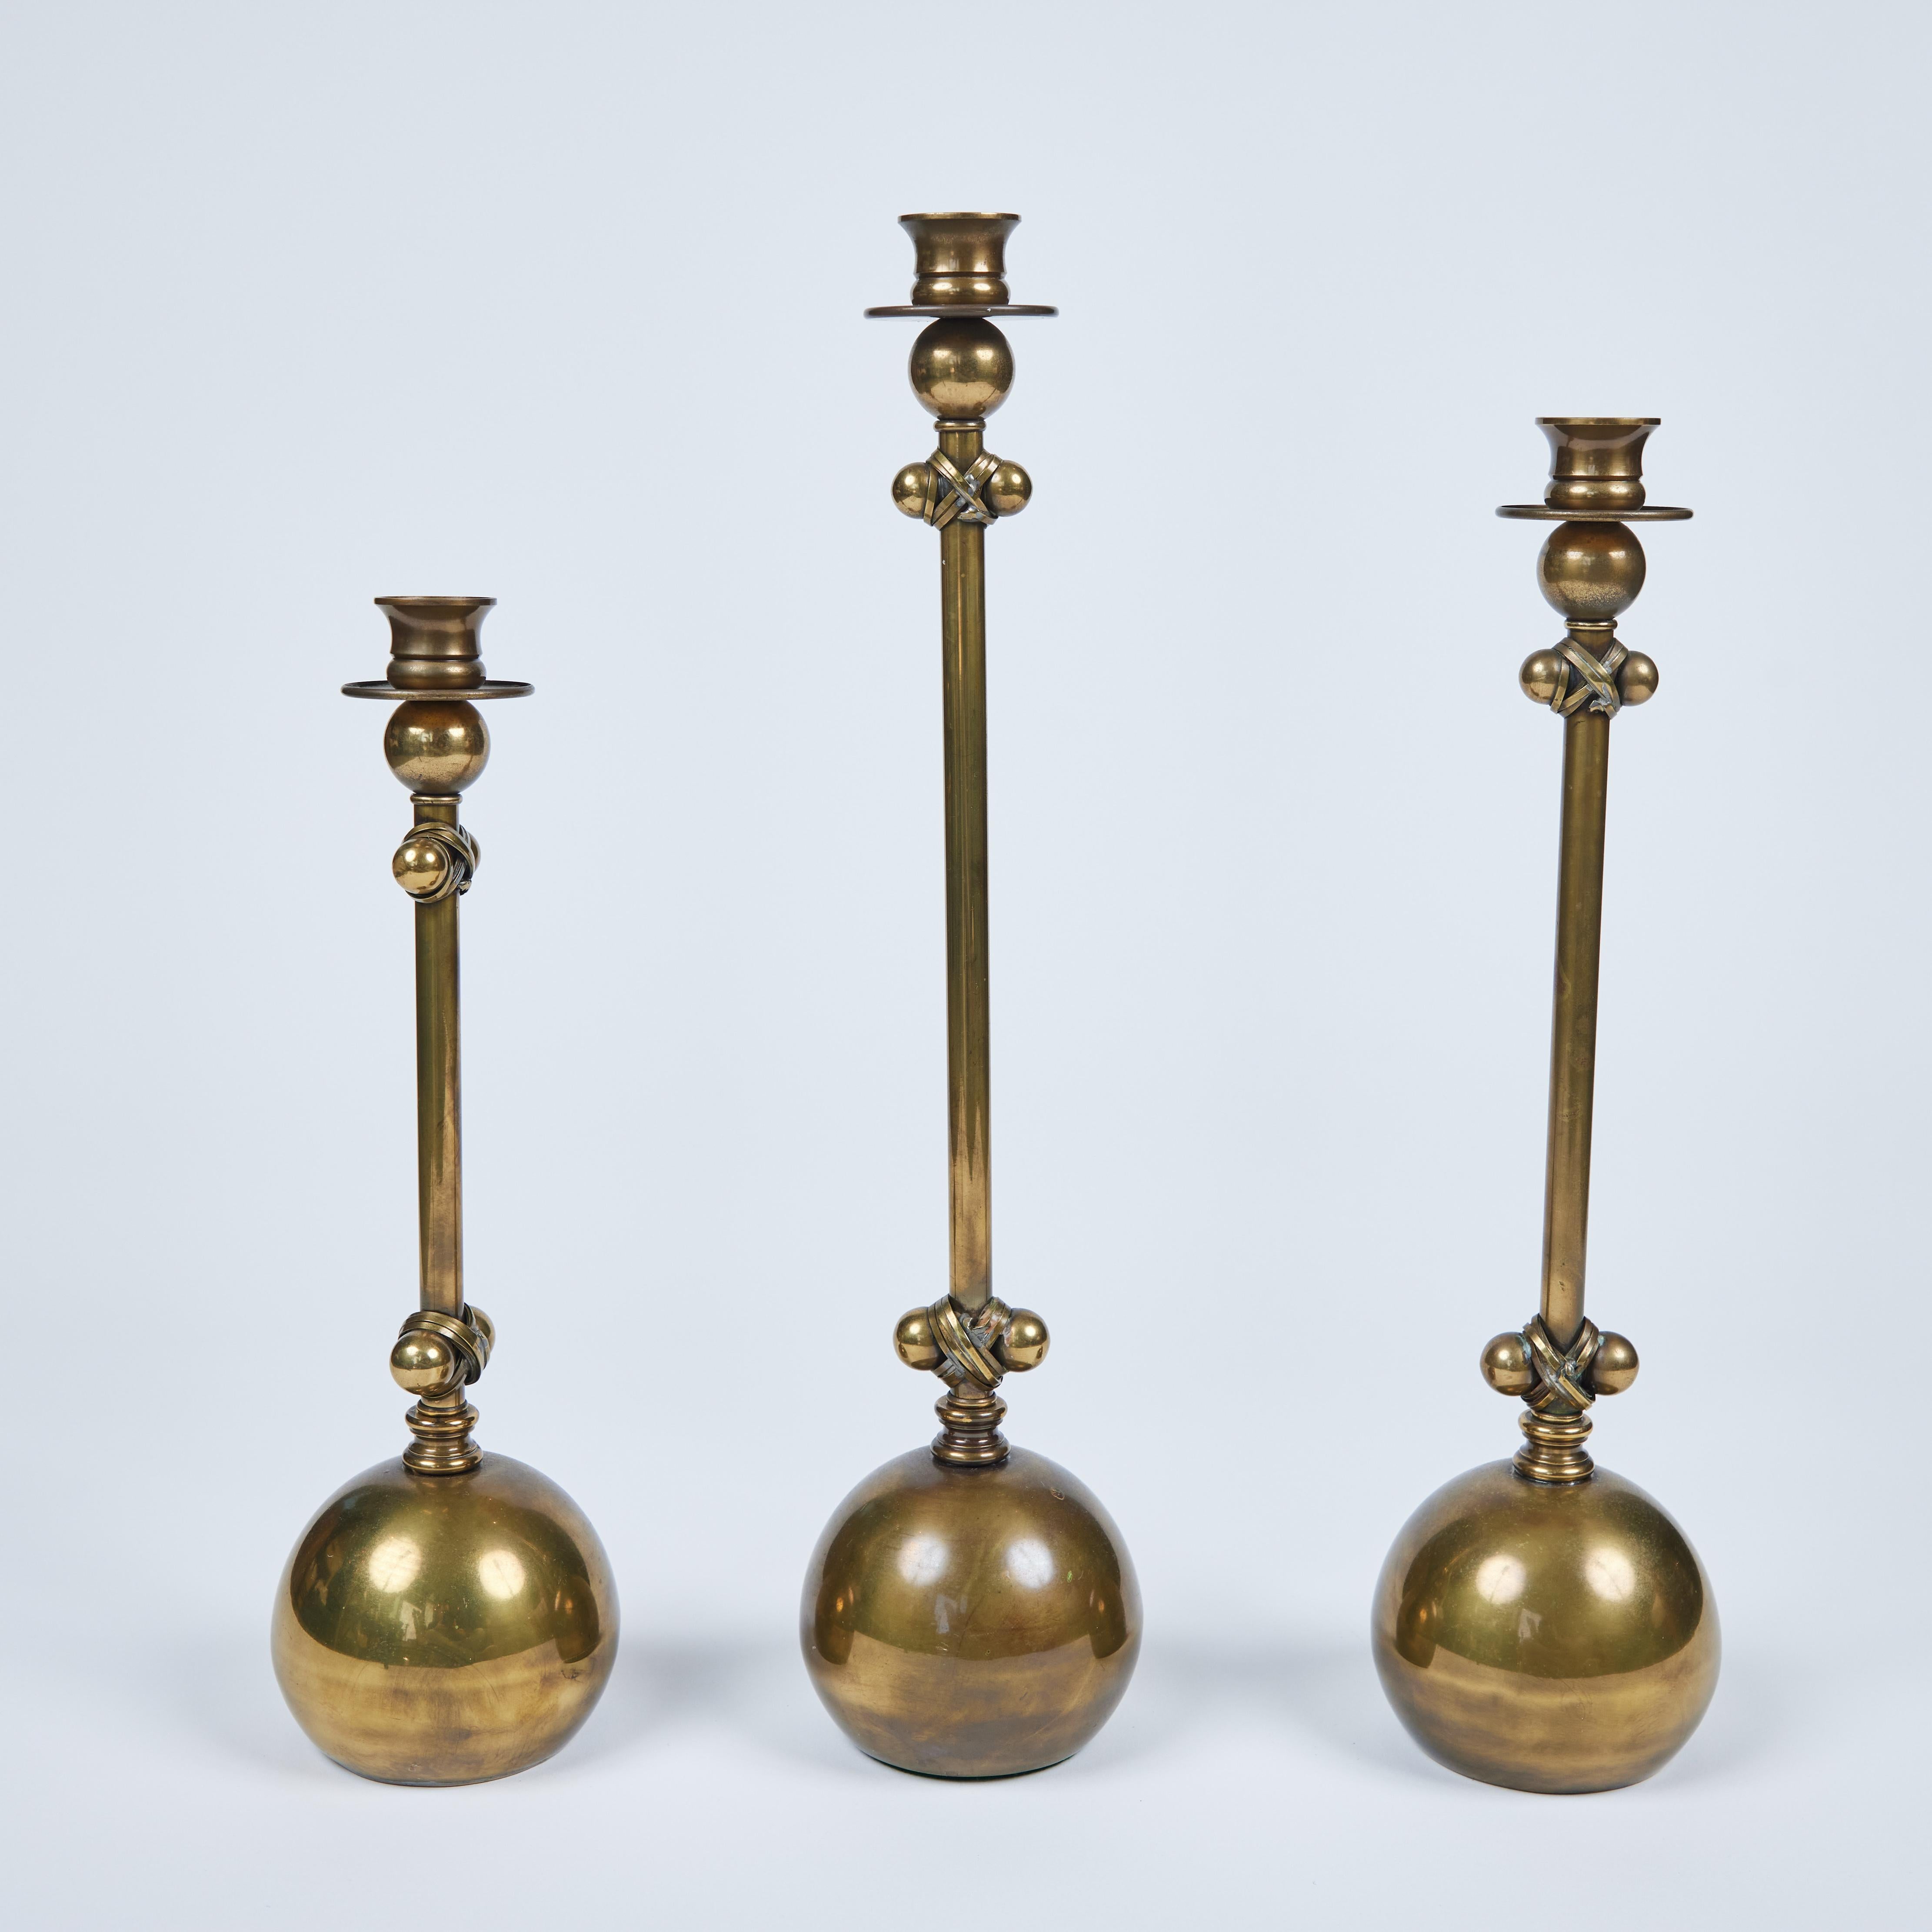 Tall and graceful this set of 3 - 1980's Ball Based Brass Candlesticks attributed to Chapman are truly stunning. They all have a similar sized bold brass ball base with the stem accents and come in 3 heights. They measure: tall 4.5